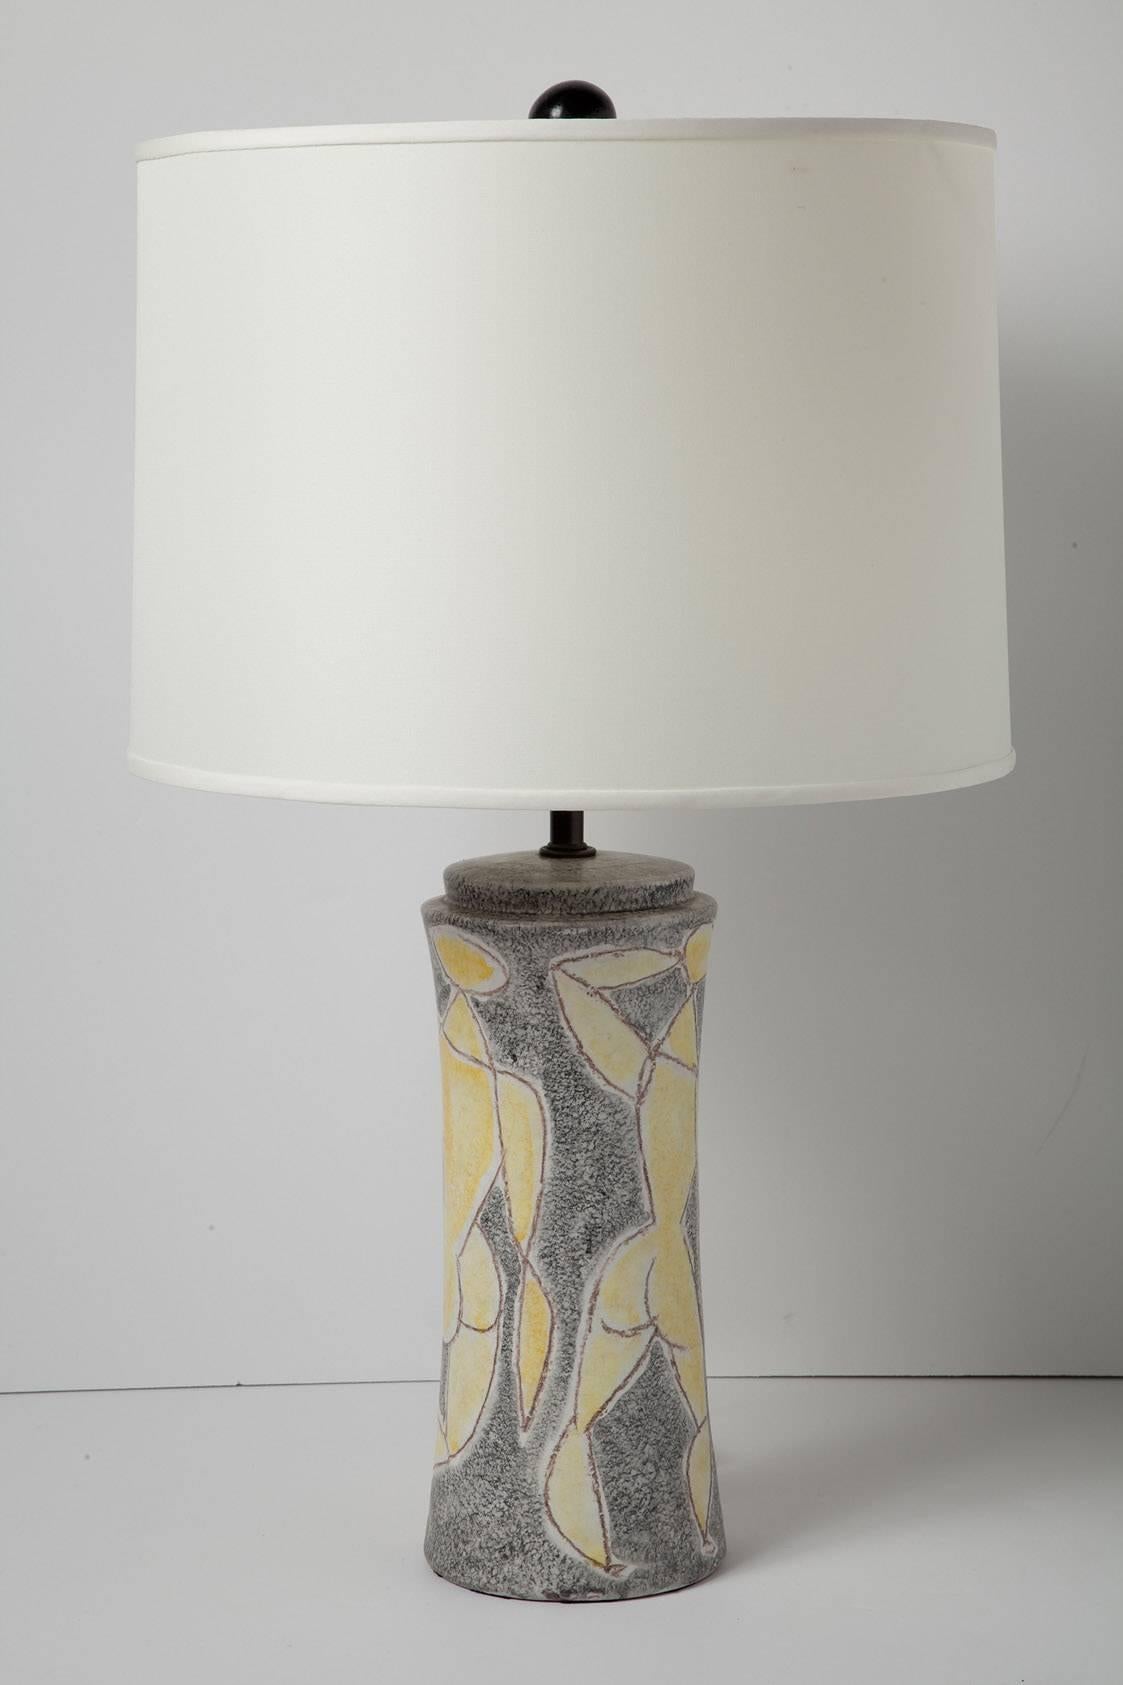 Signed 1950s Italian ceramic lamp by Marcello Fantoni, featuring captivating crayon-style figural drawings. Signed on verso. (Lamp only. Shade, harp and finial not included.) Height measurement is 17.5